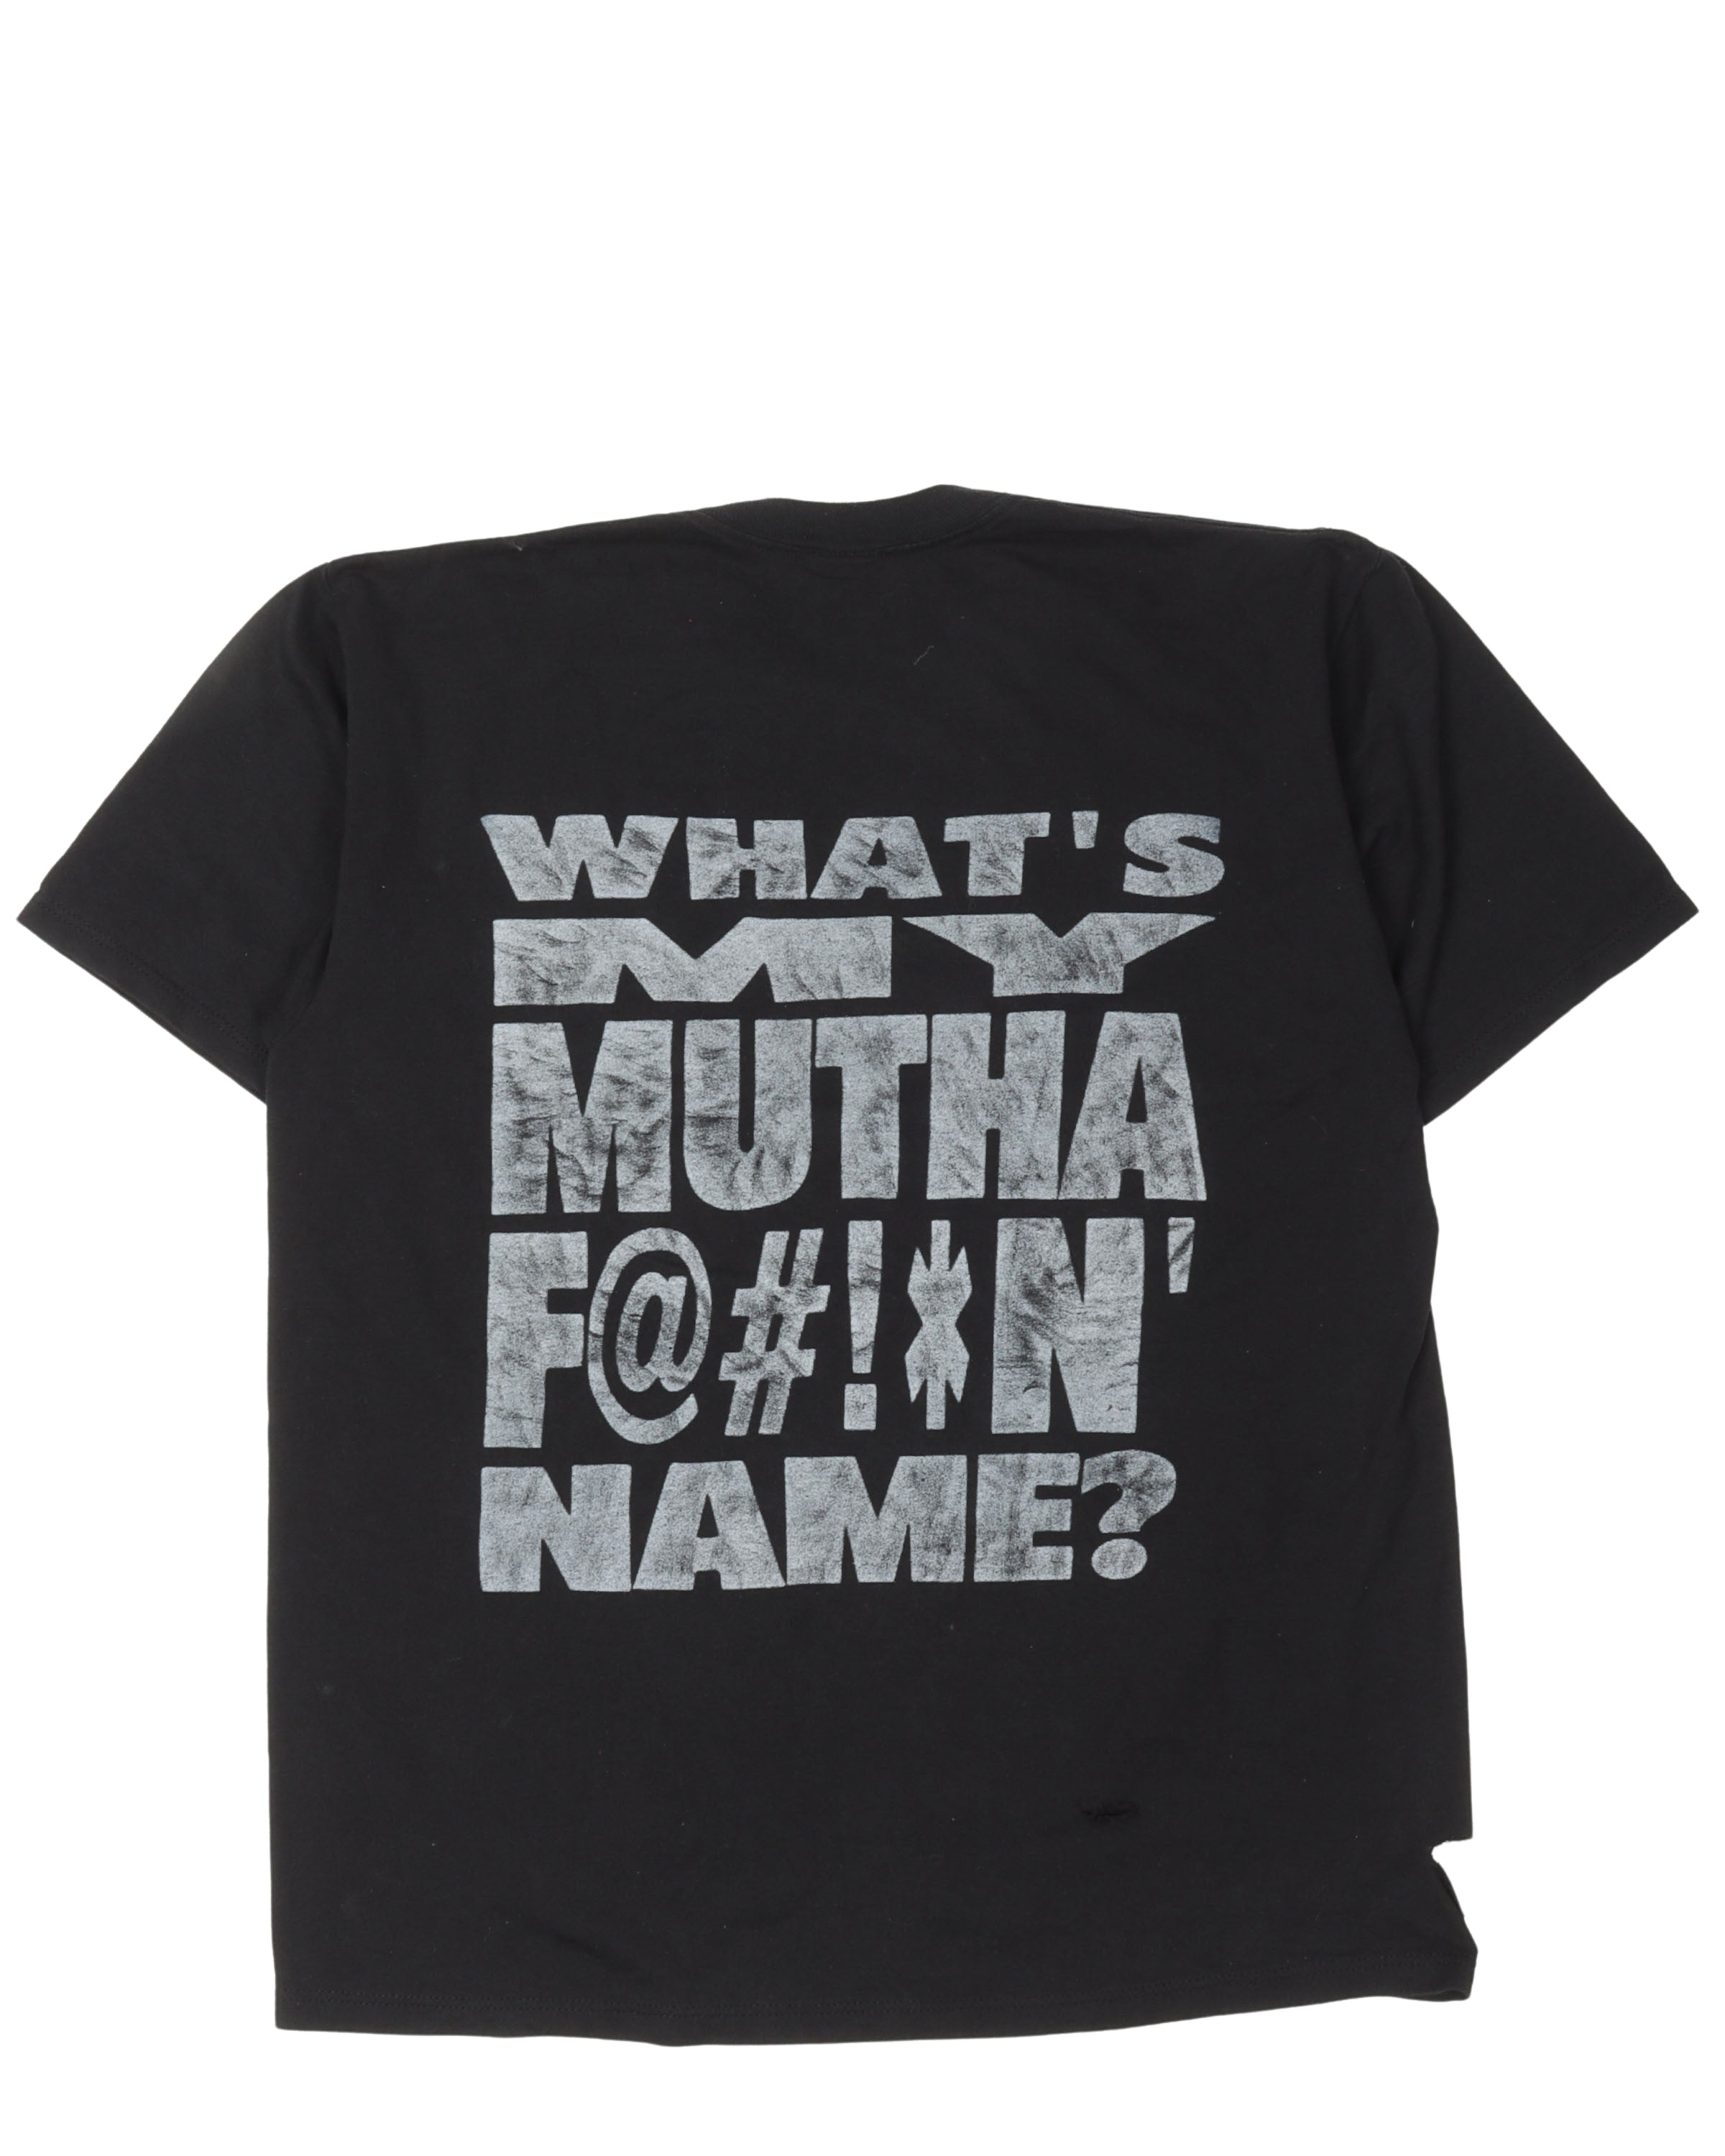 Snoop Doggy Dog "Whats My Name" T-Shirt